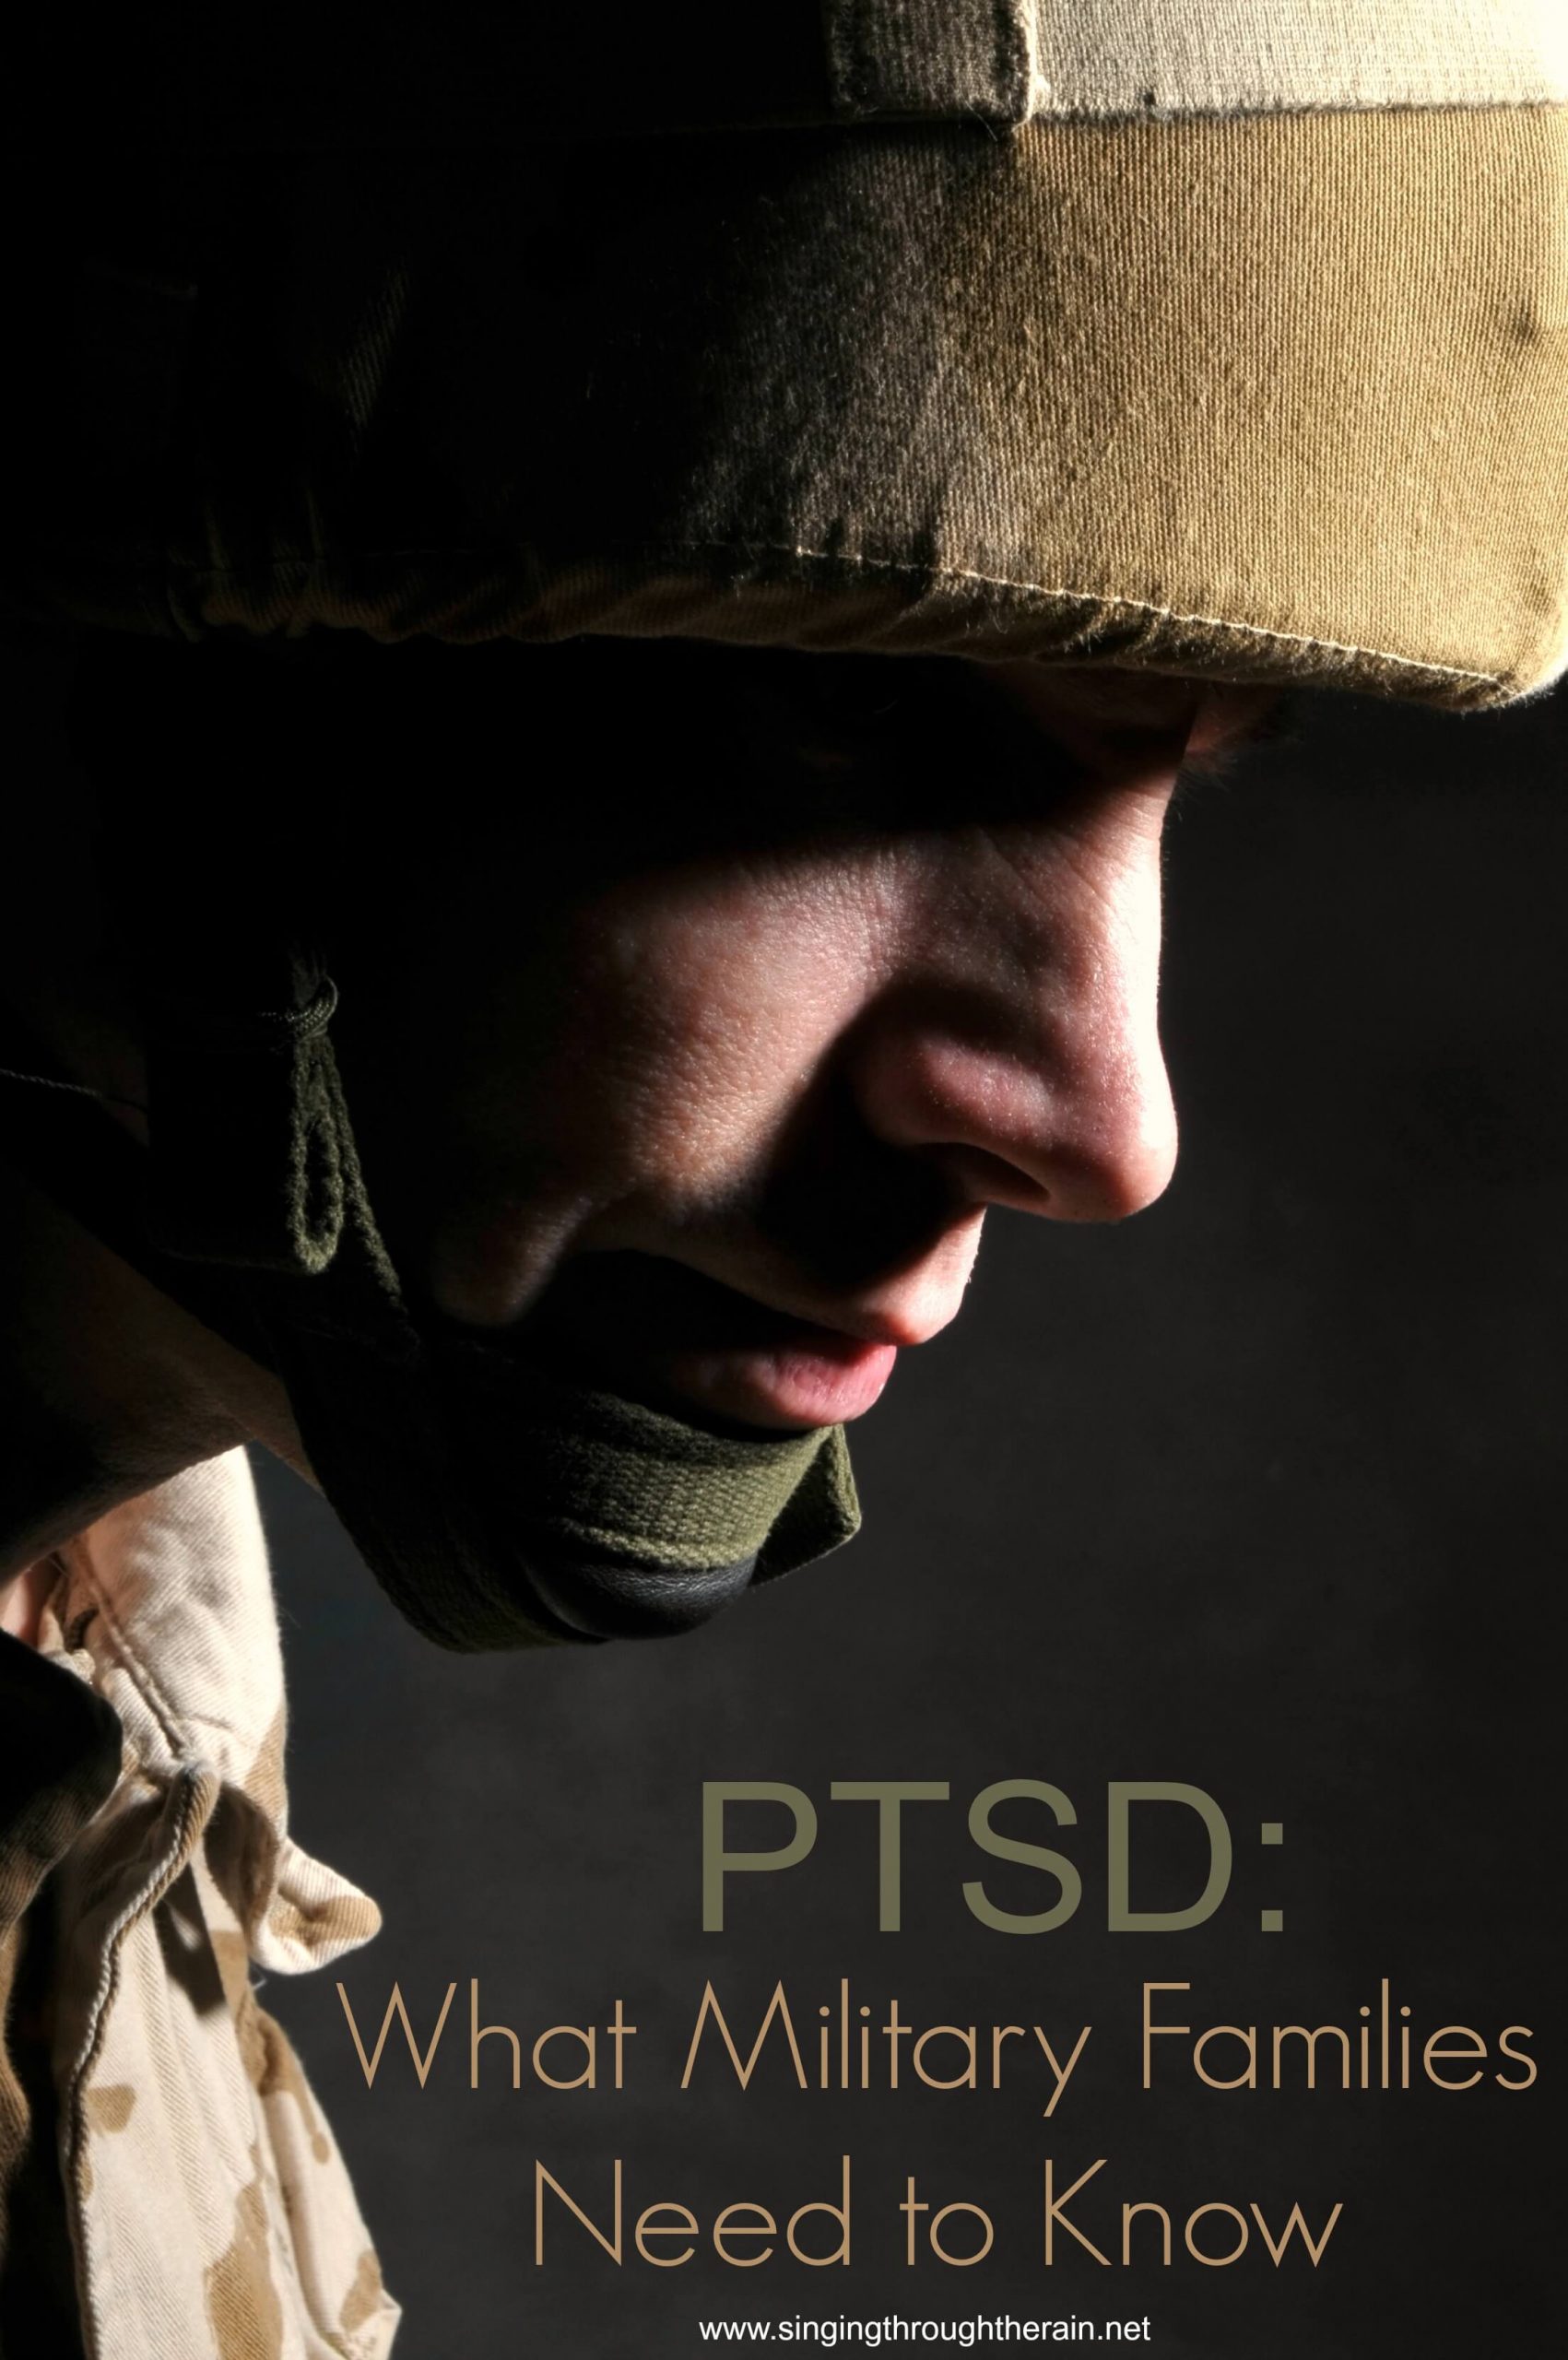 PTSD: What Military Families Need to Know